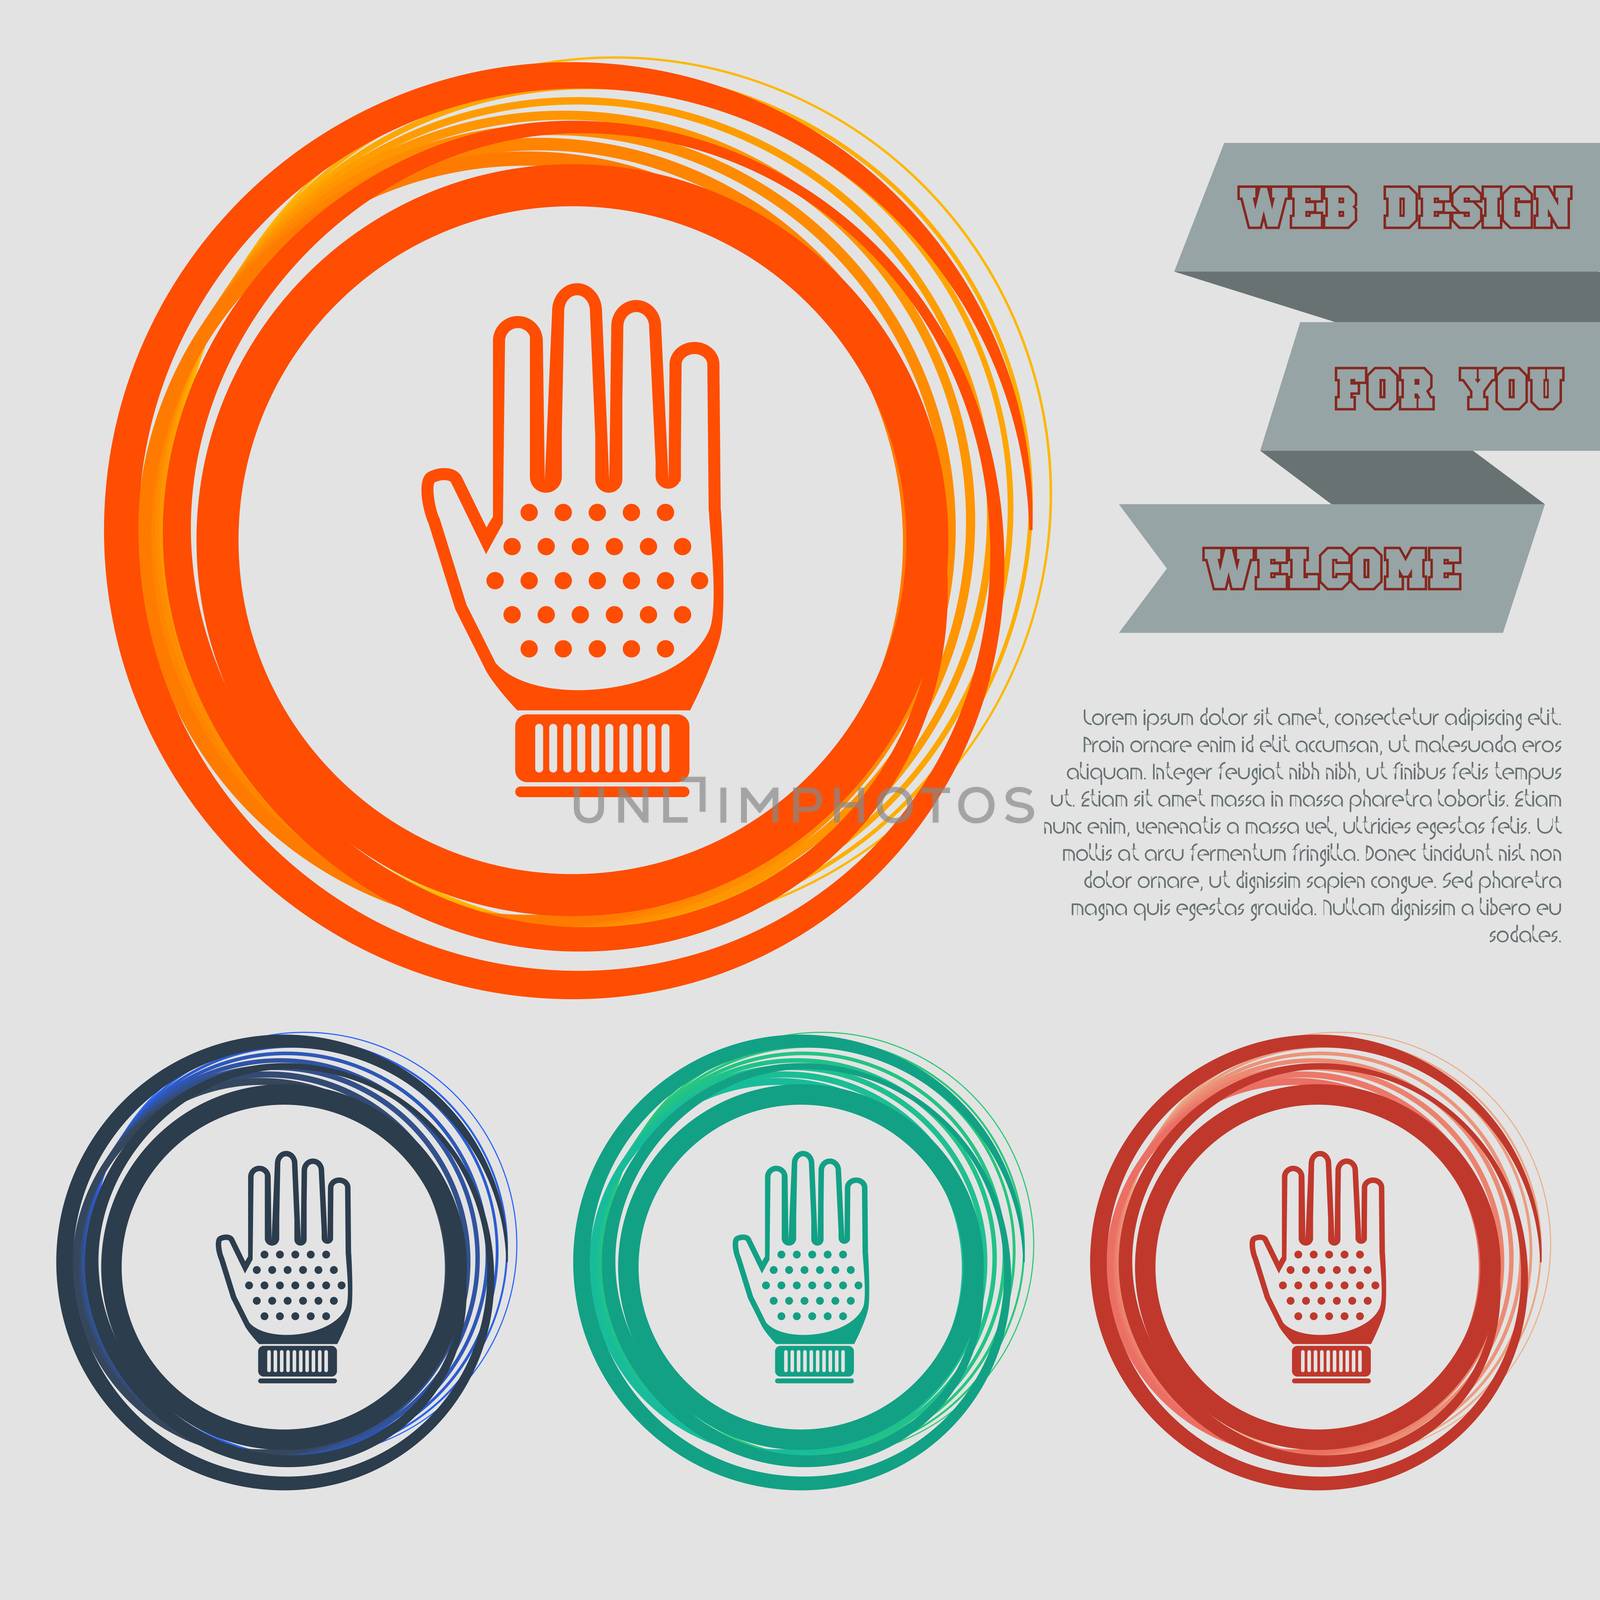 gloves icon on the red, blue, green, orange buttons for your website and design with space text.  by Adamchuk